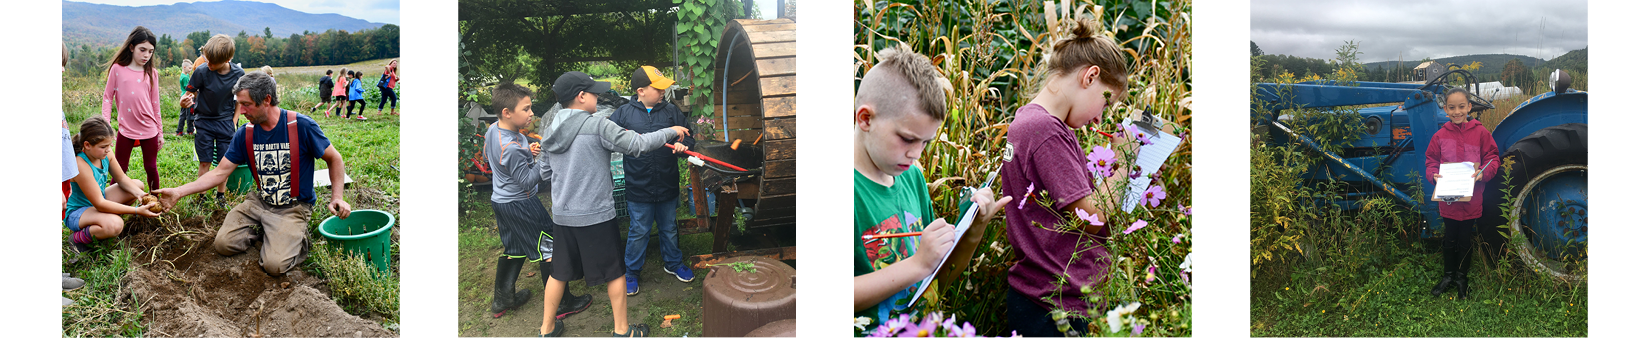 Collage of images of elementary kids exploring a farm and taking notes